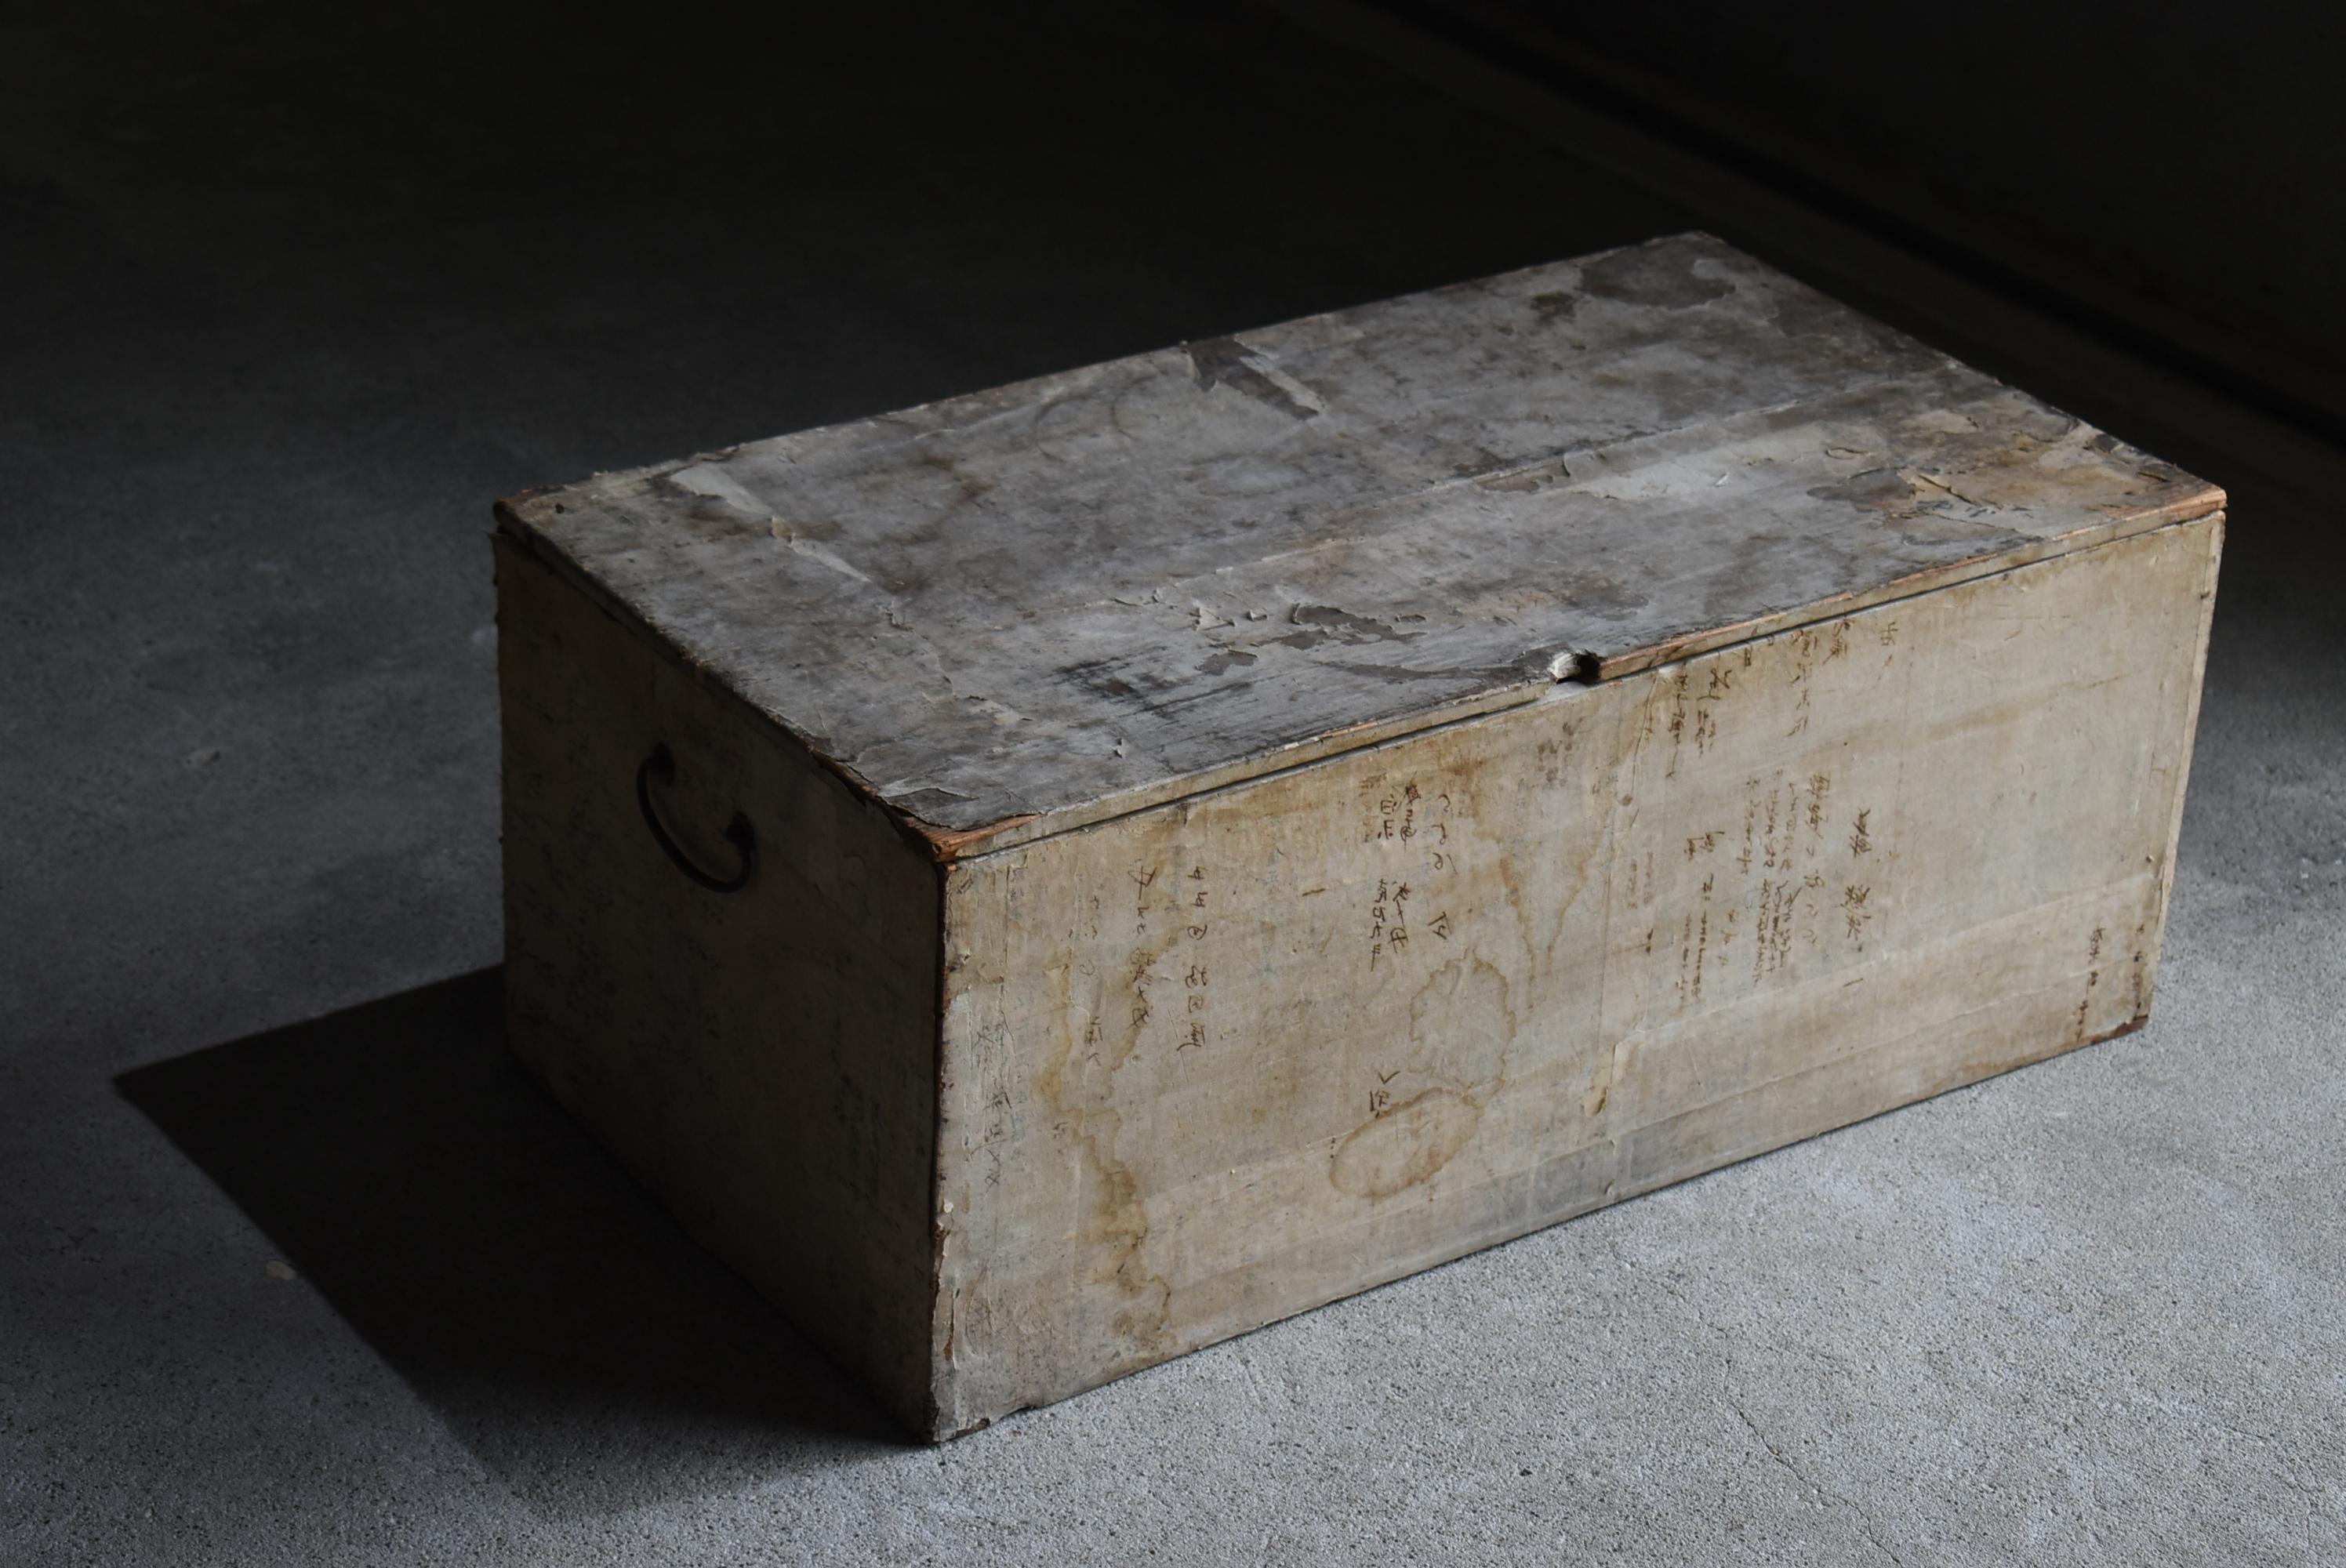 Japanese Antique Paper-Covered Wooden Box 1860s-1920s / Sofa Table Wabi Sabi 13